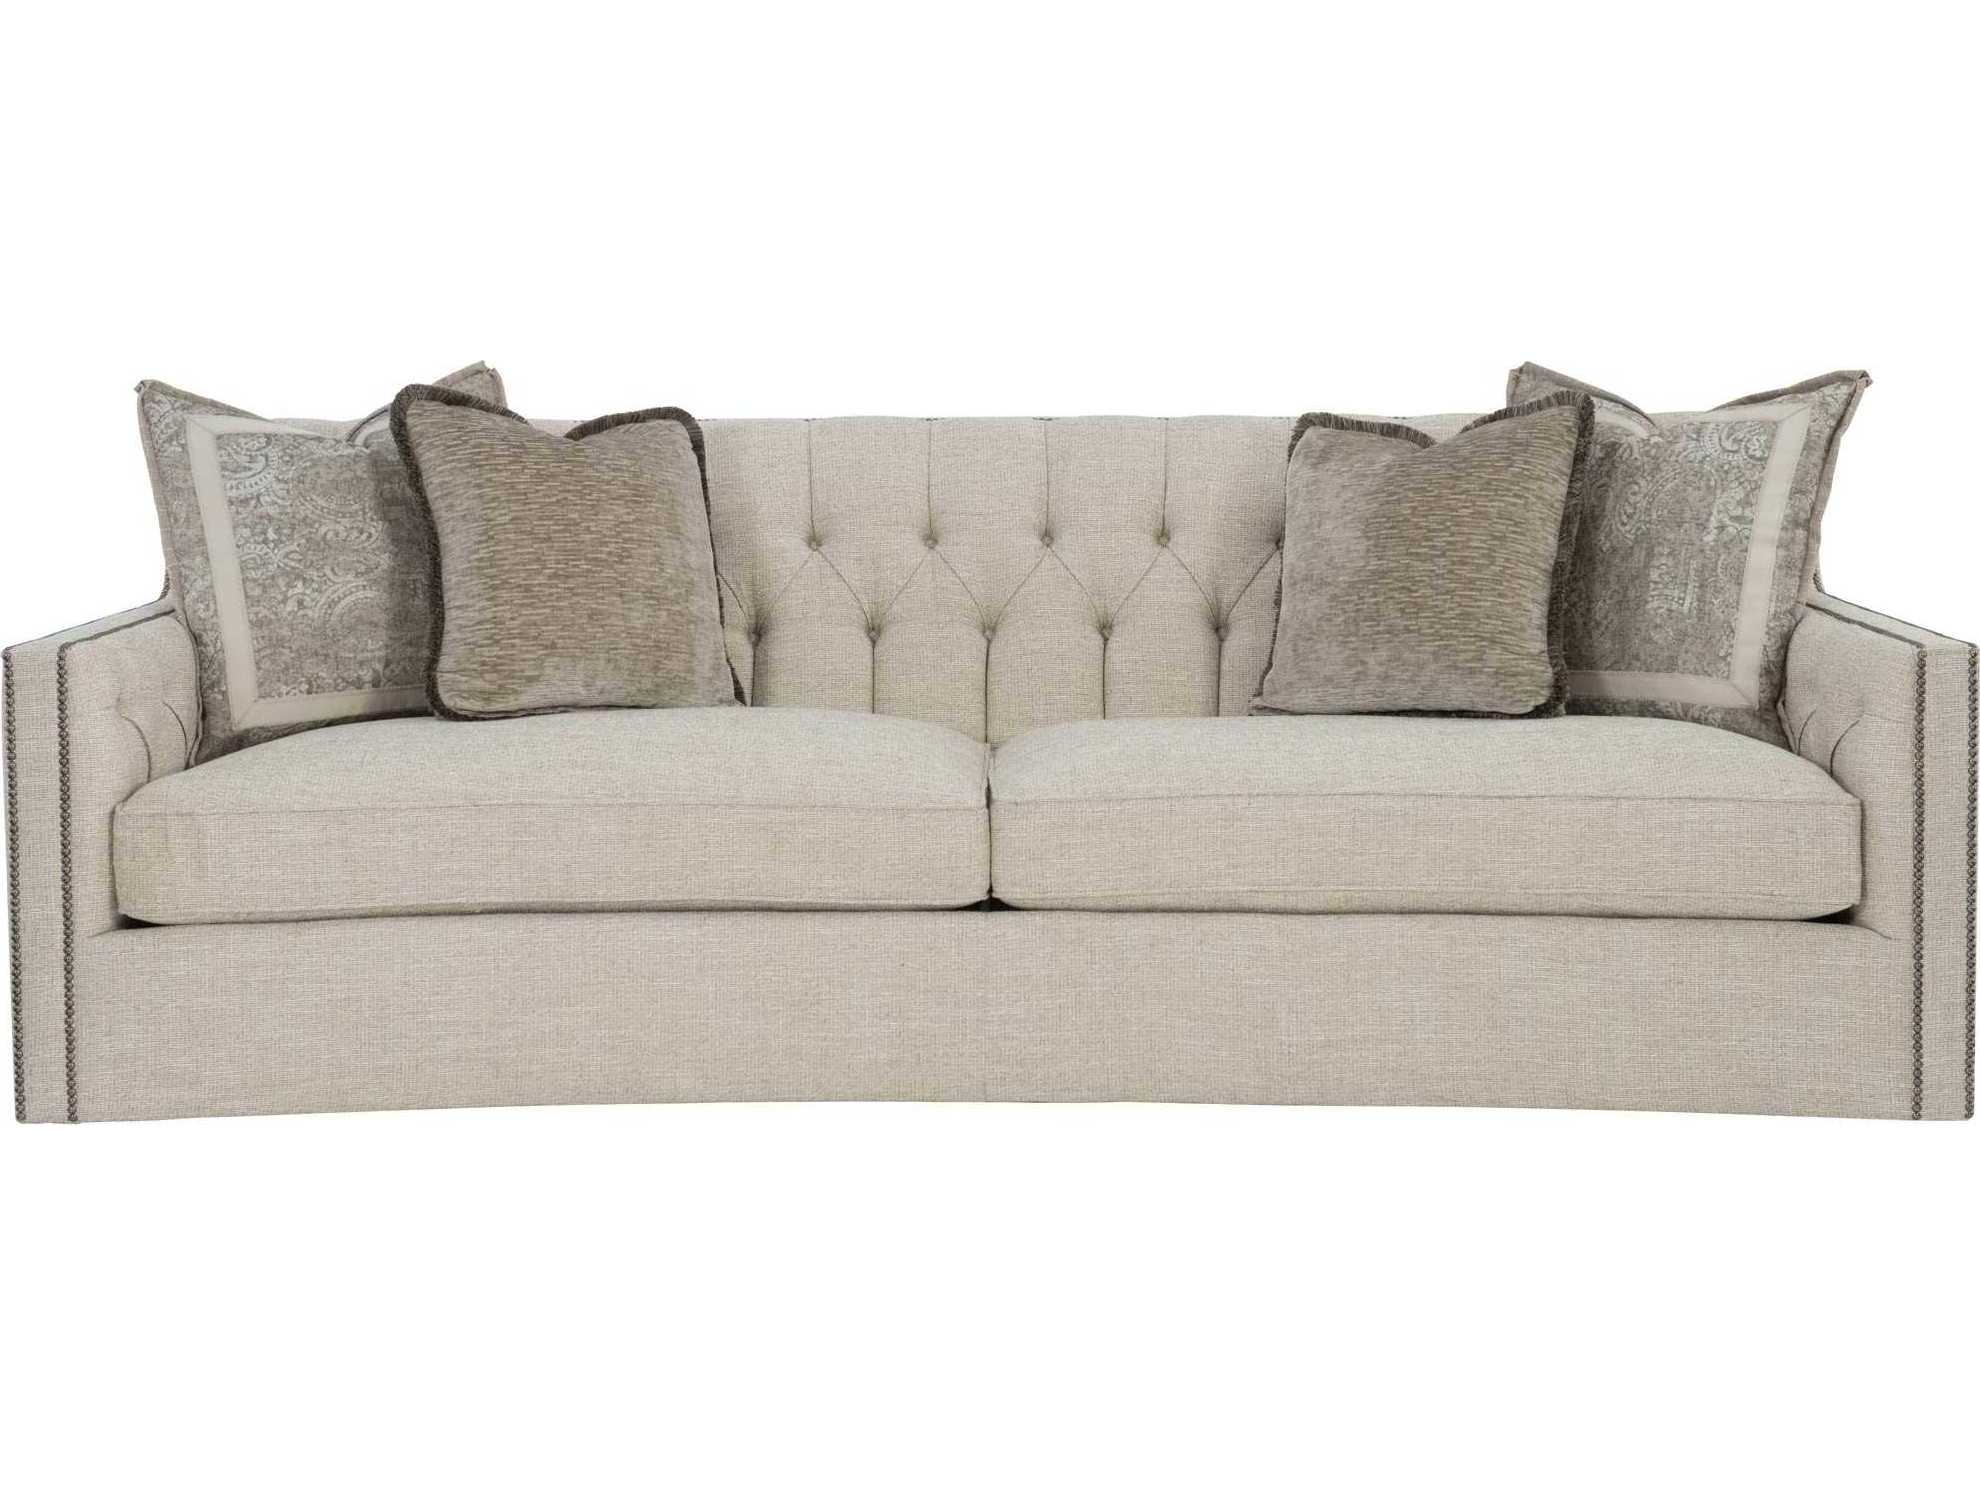 Bernhardt Candace Sofa Couch Bhb7277c, Bernhardt Leather Sectional Couch